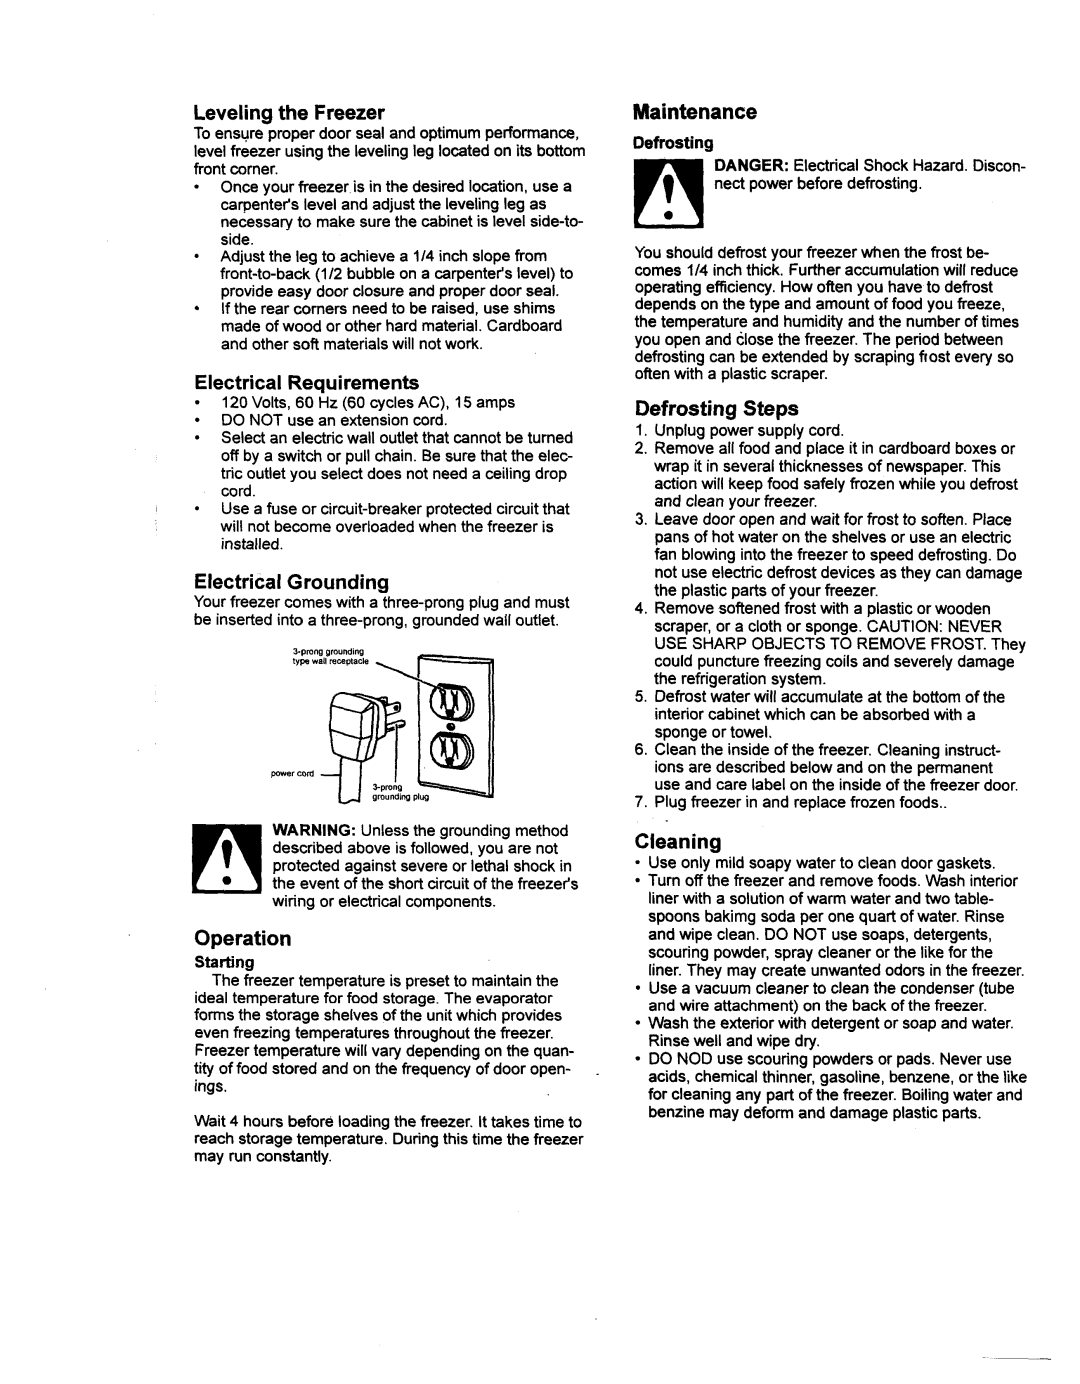 Kenmore 29701 warranty Leveling the Freezer, Electrical Grounding, Operation, Defrosting Steps, Cleaning 